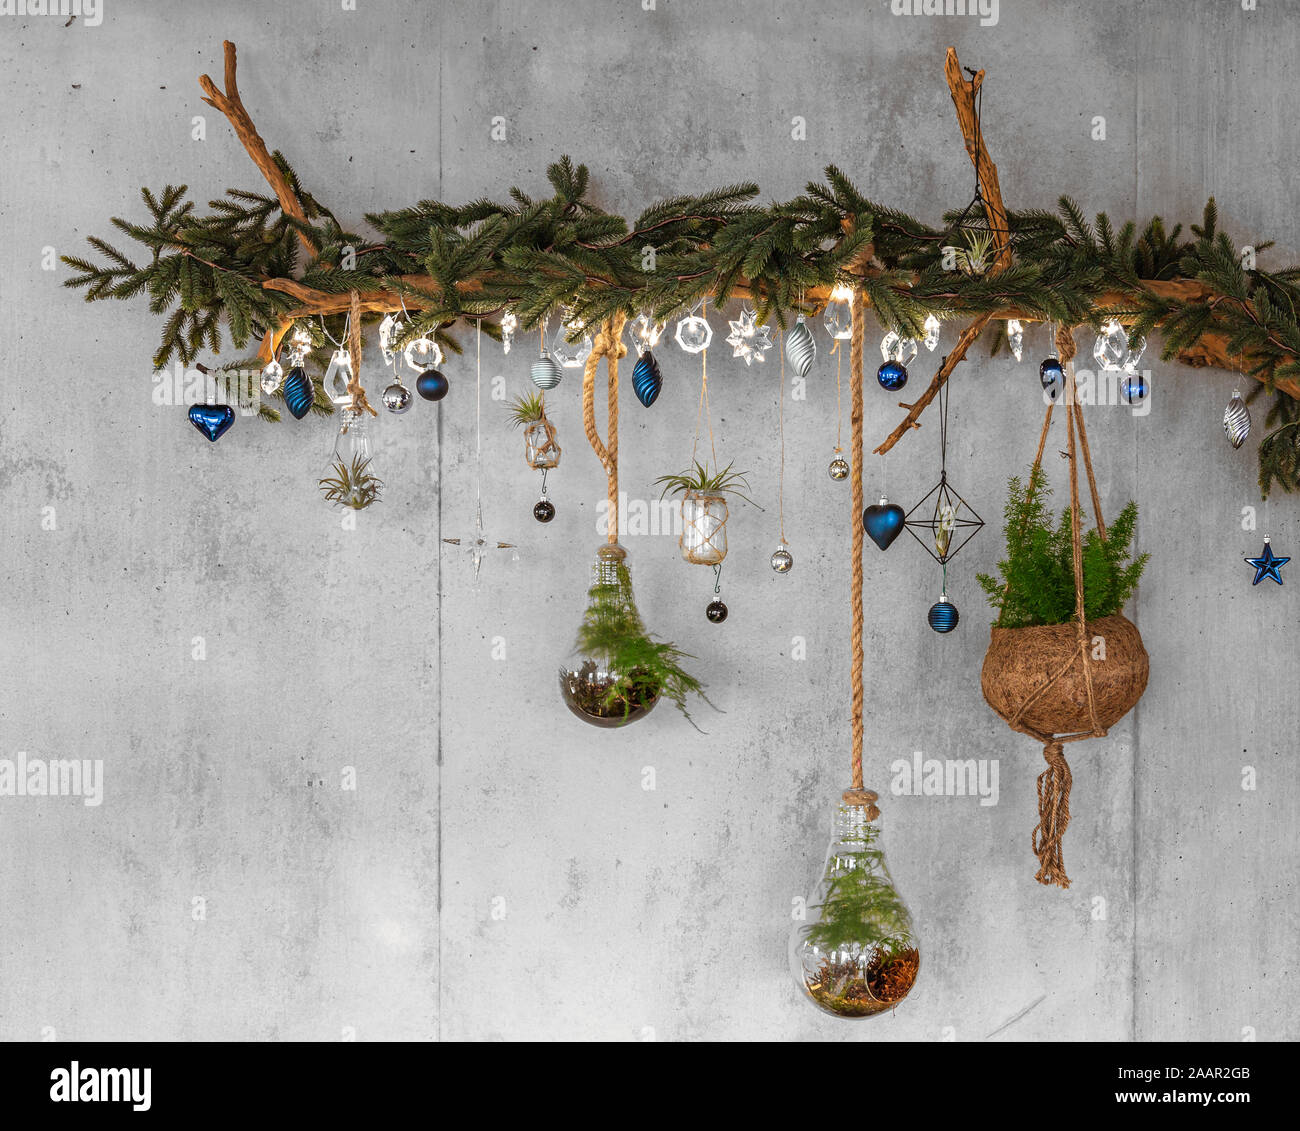 Decorative Wooden Branch with fir branches and hanging blue christmas baubles, silver lights like snowflakes, fern and air plant, on a modern cement o Stock Photo